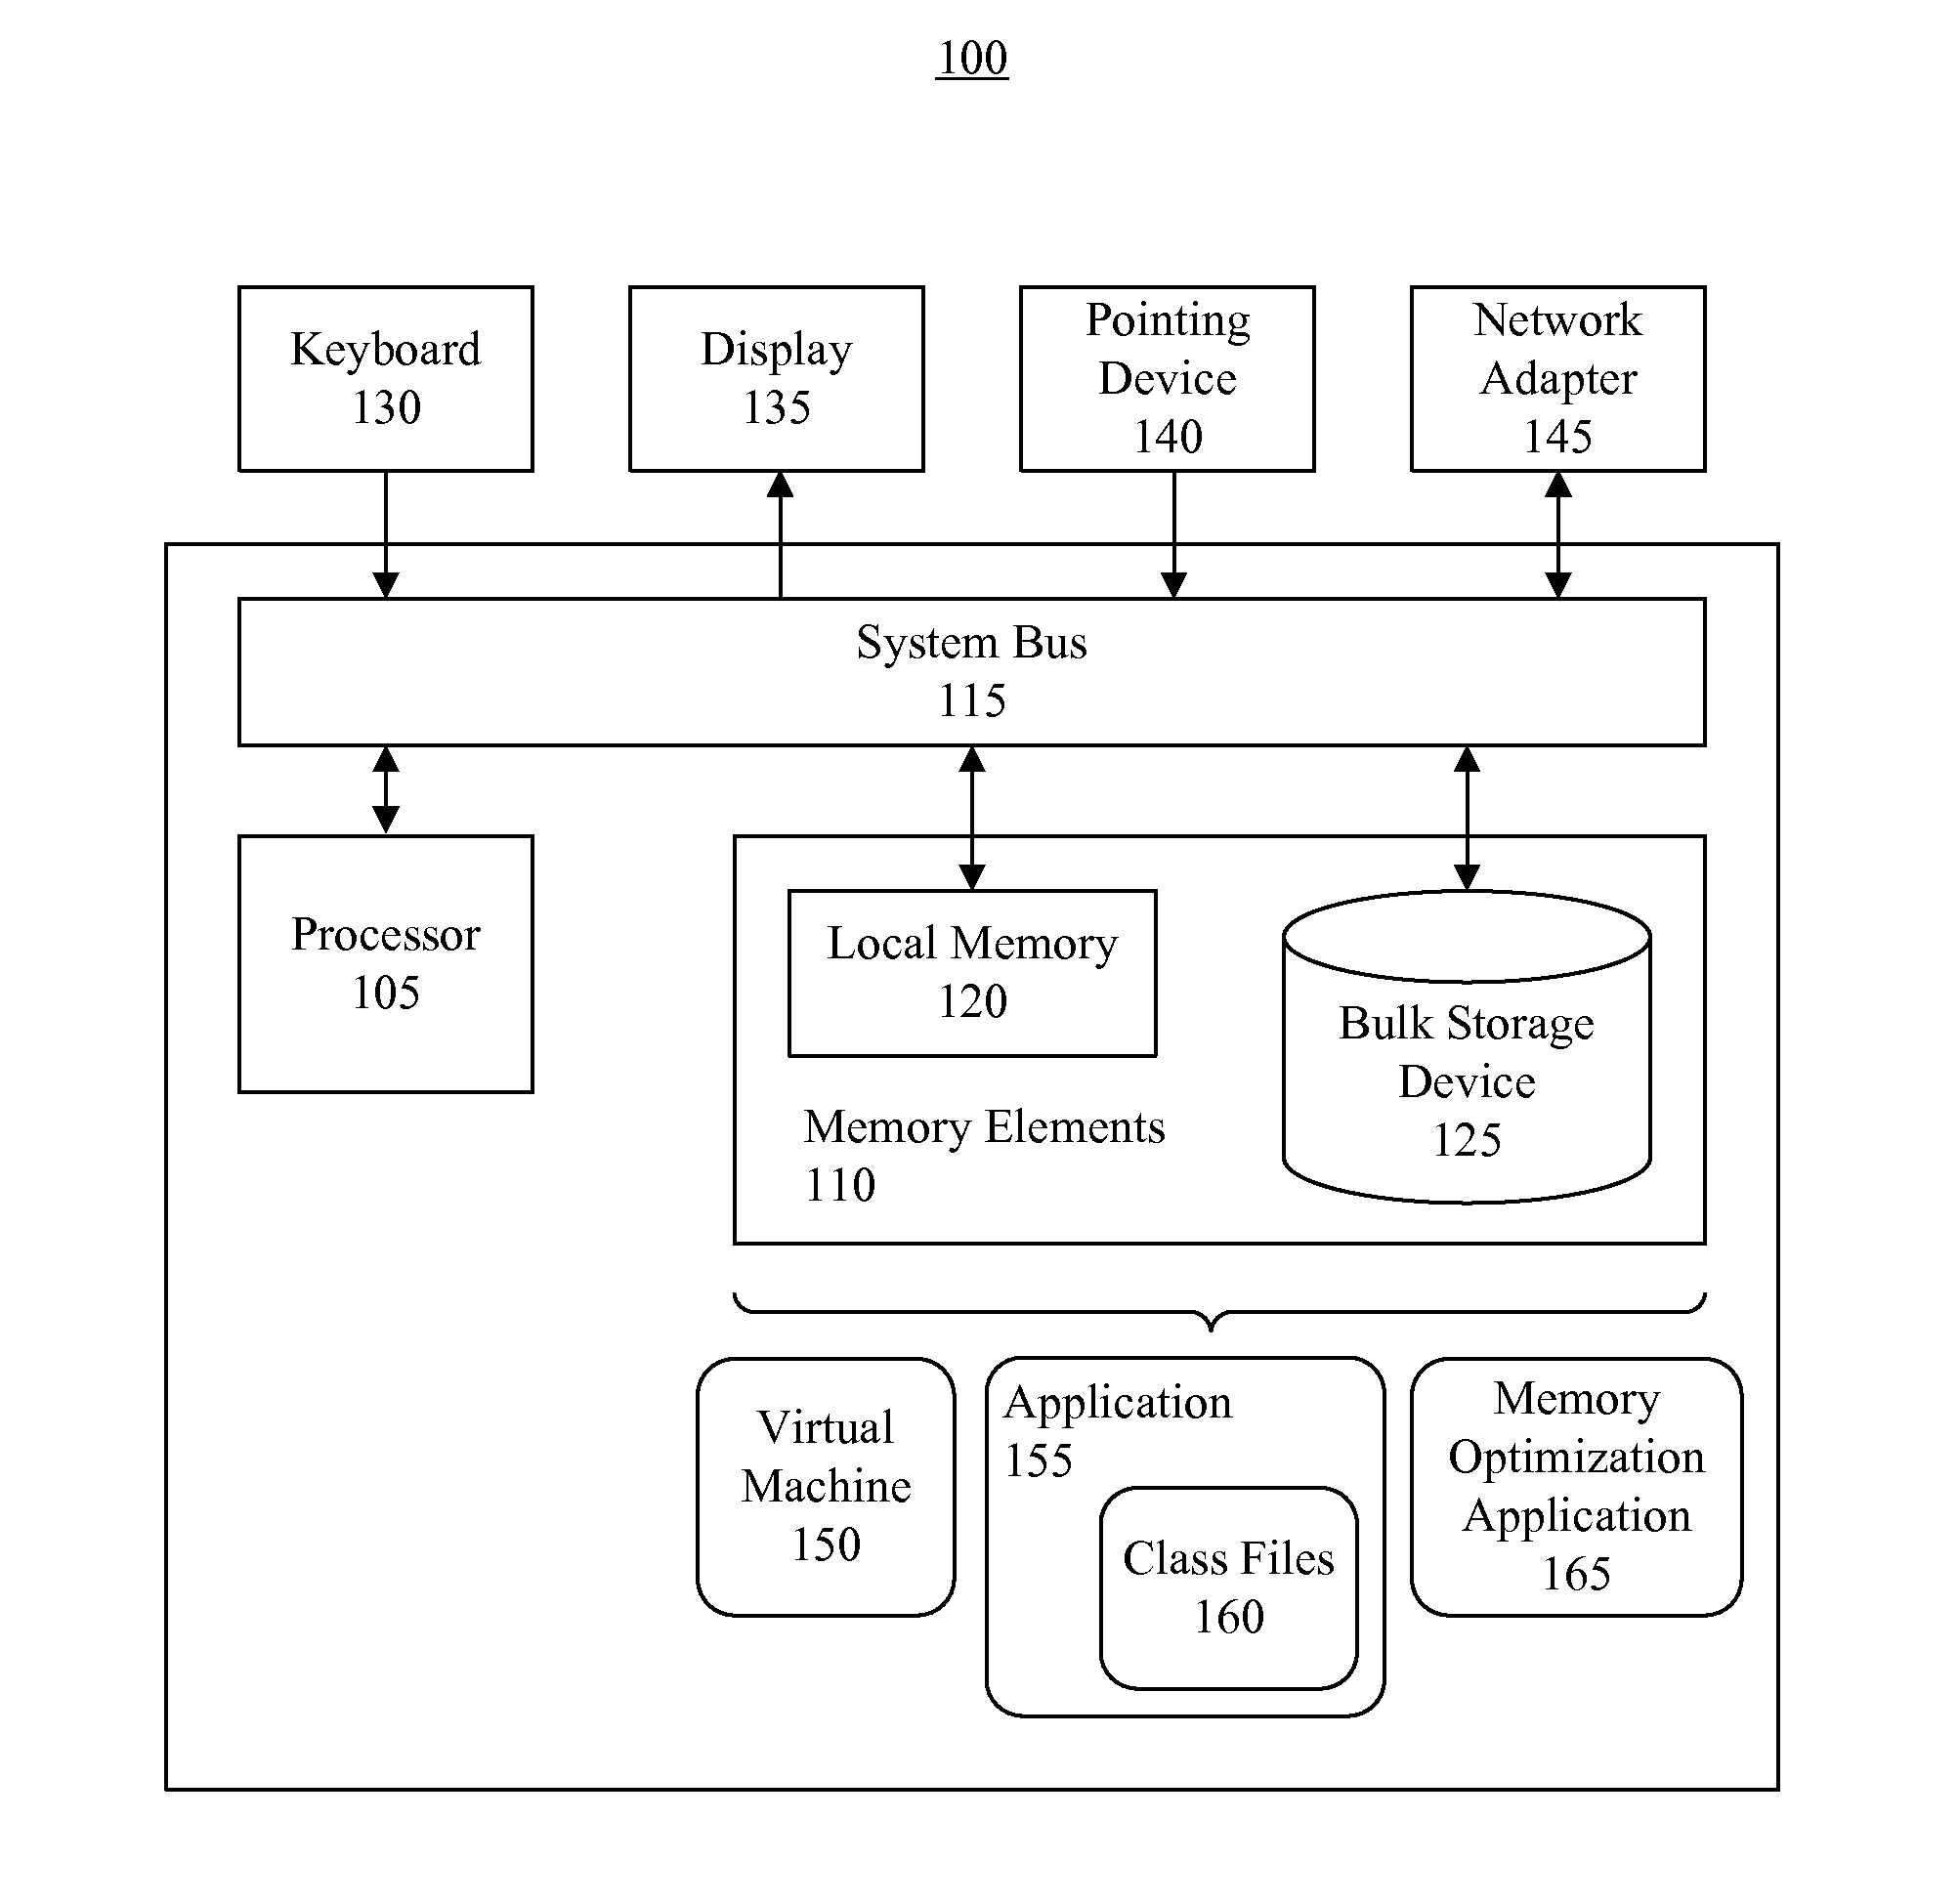 Optimization of an application to reduce local memory usage